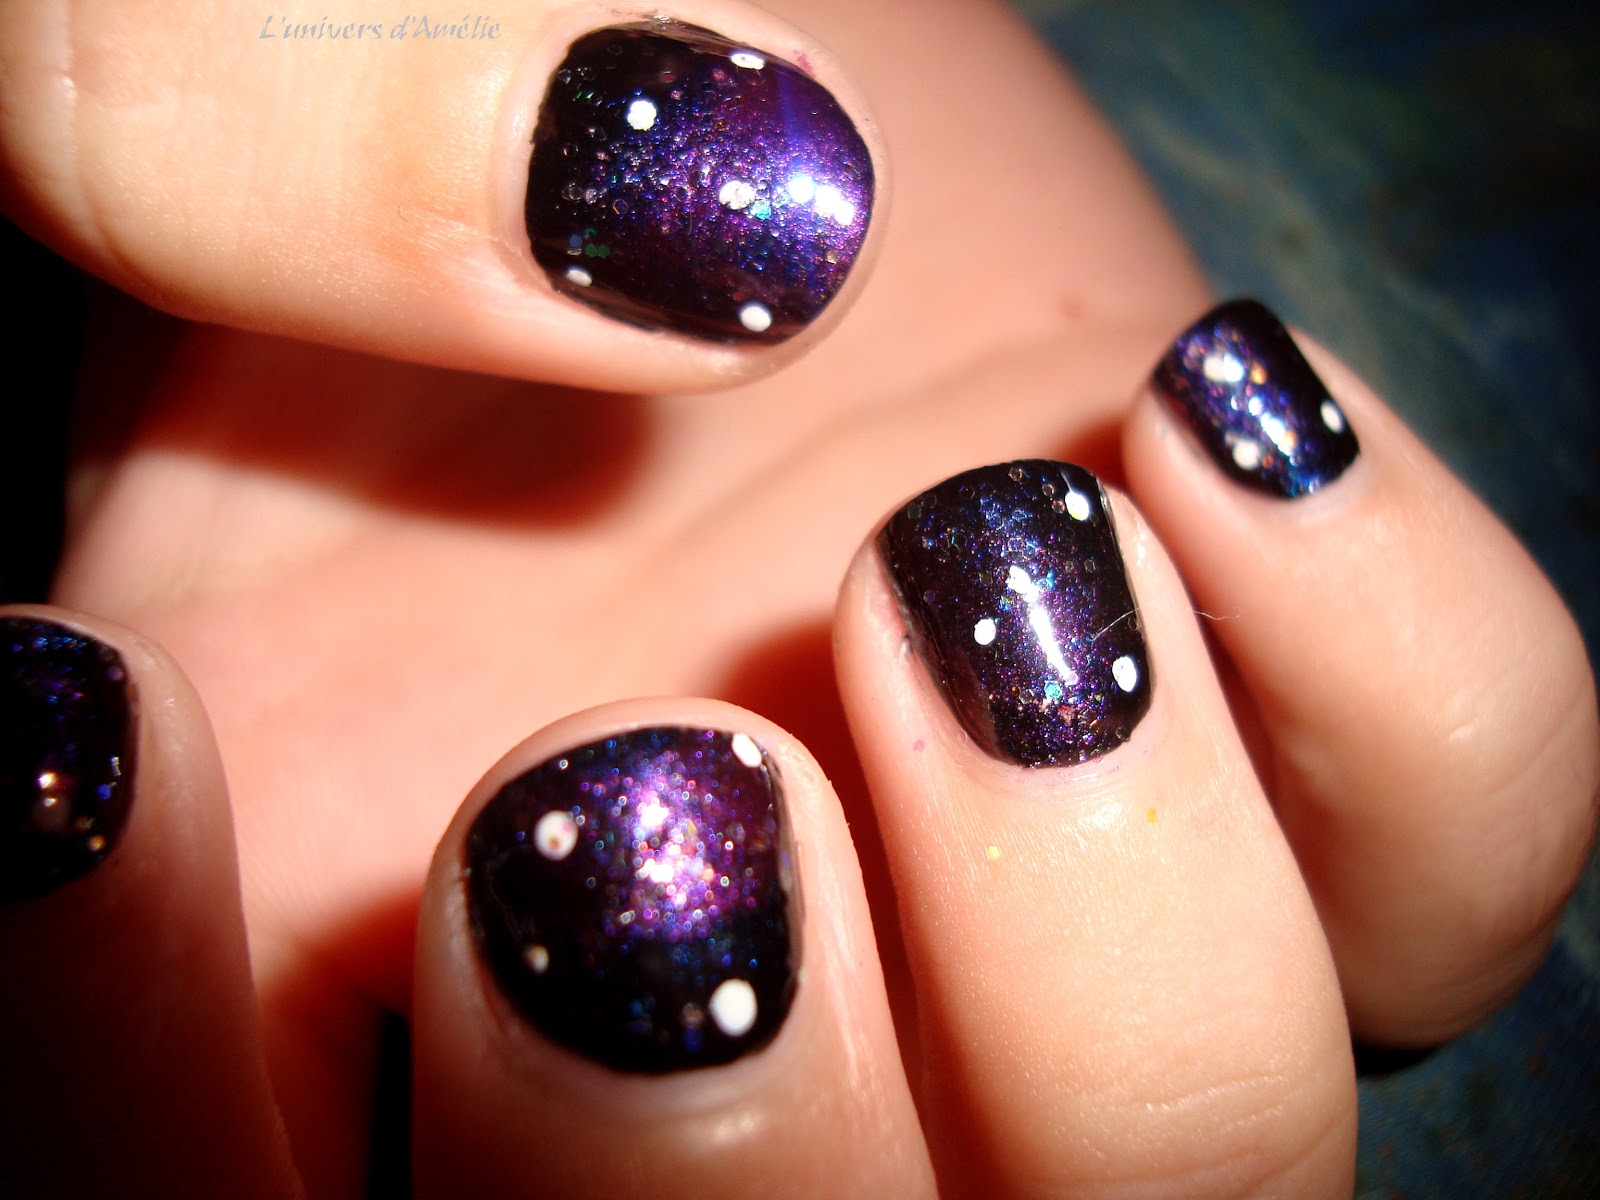 1. Galaxy Nail Art Tutorial: Step by Step Guide - wide 2